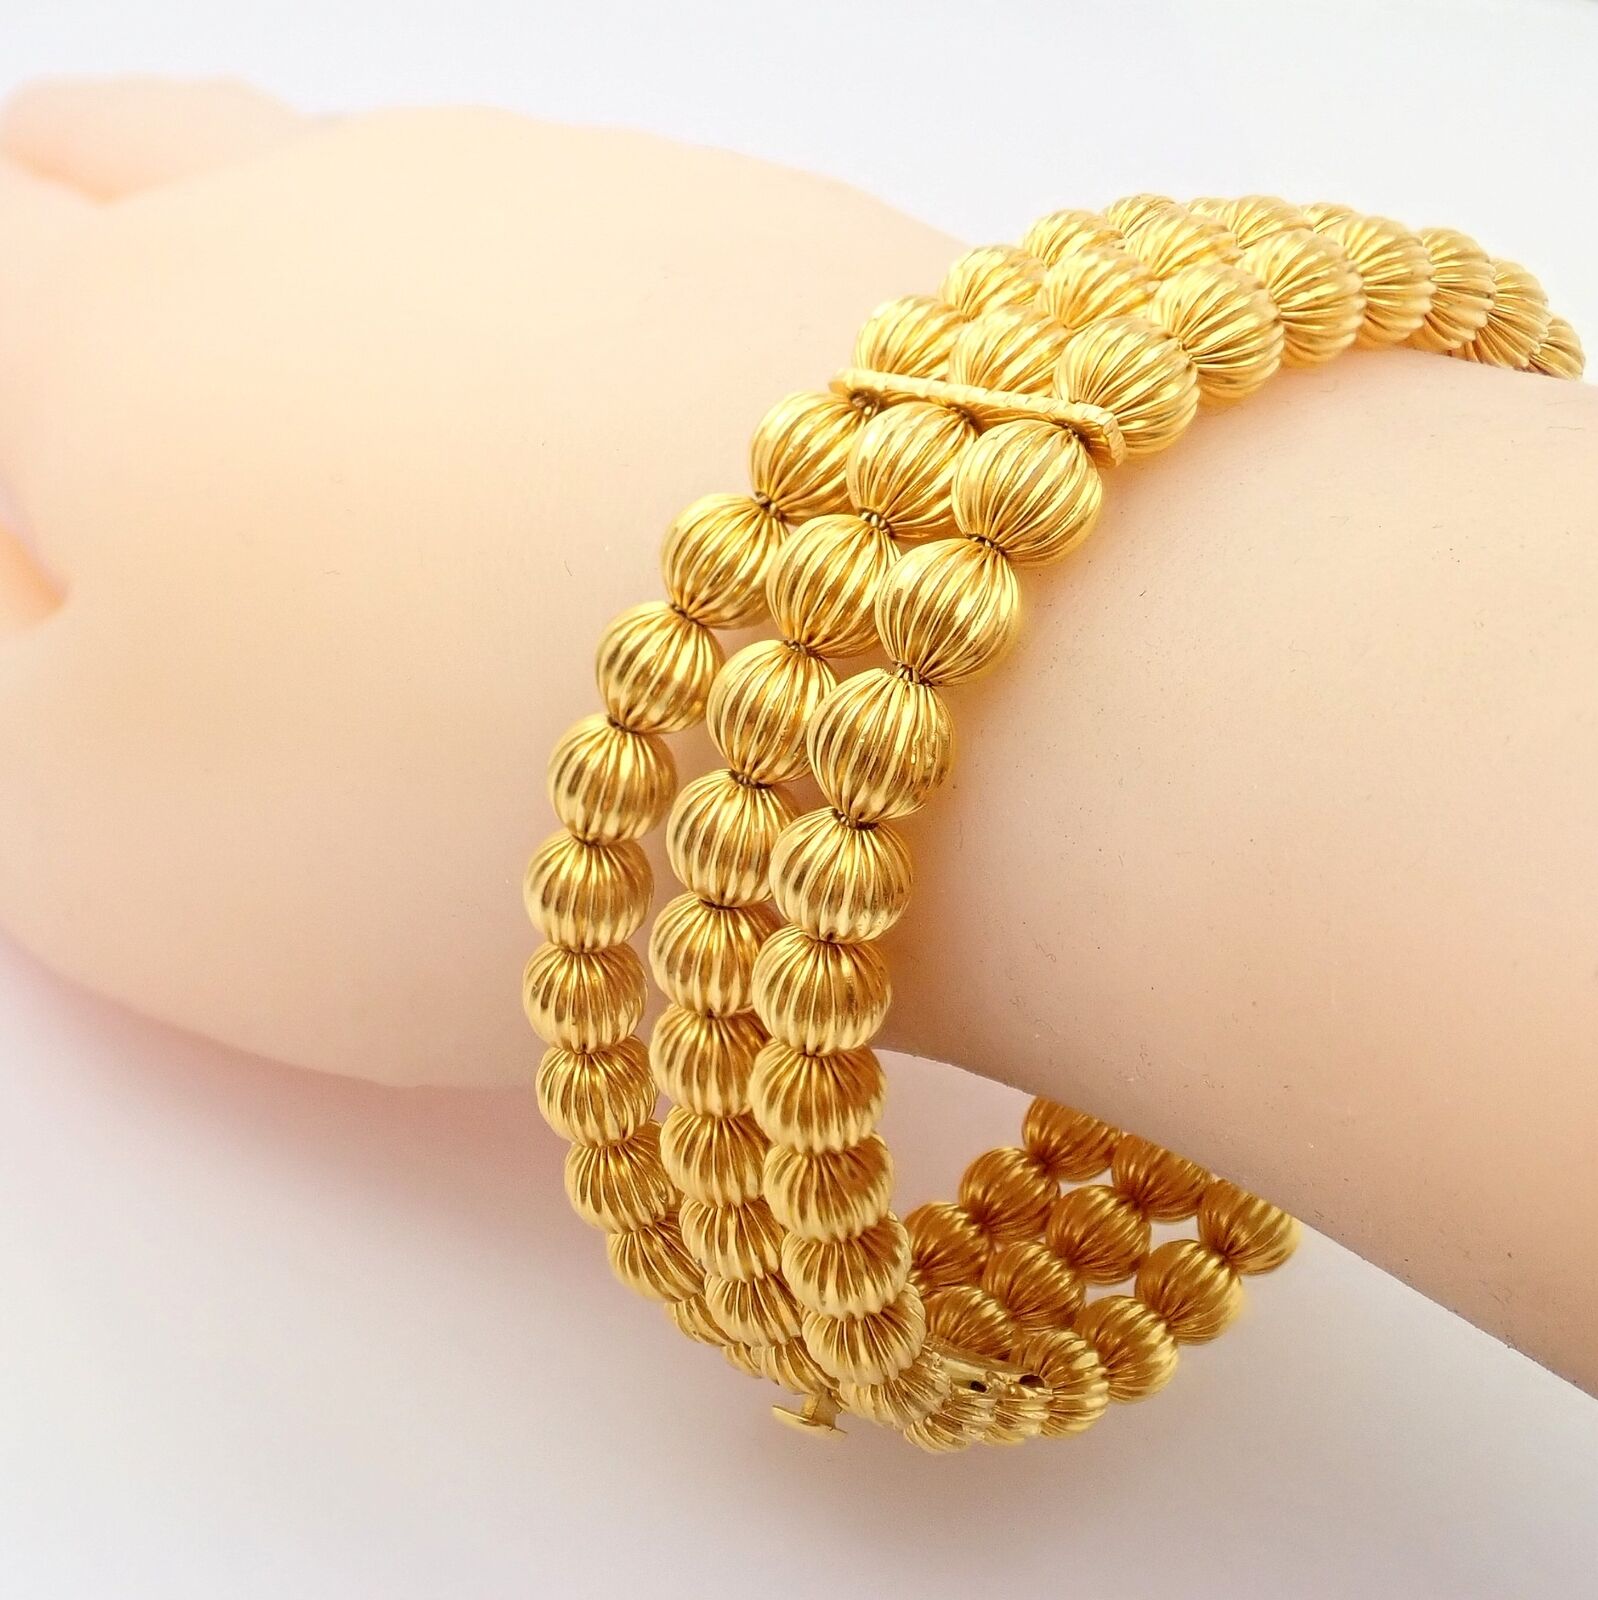 Lalaounis Jewelry & Watches:Vintage & Antique Jewelry:Bracelets & Charms Vintage Estate Ilias Lalaounis 18k Yellow Gold Carved Bead Ball Bracelet